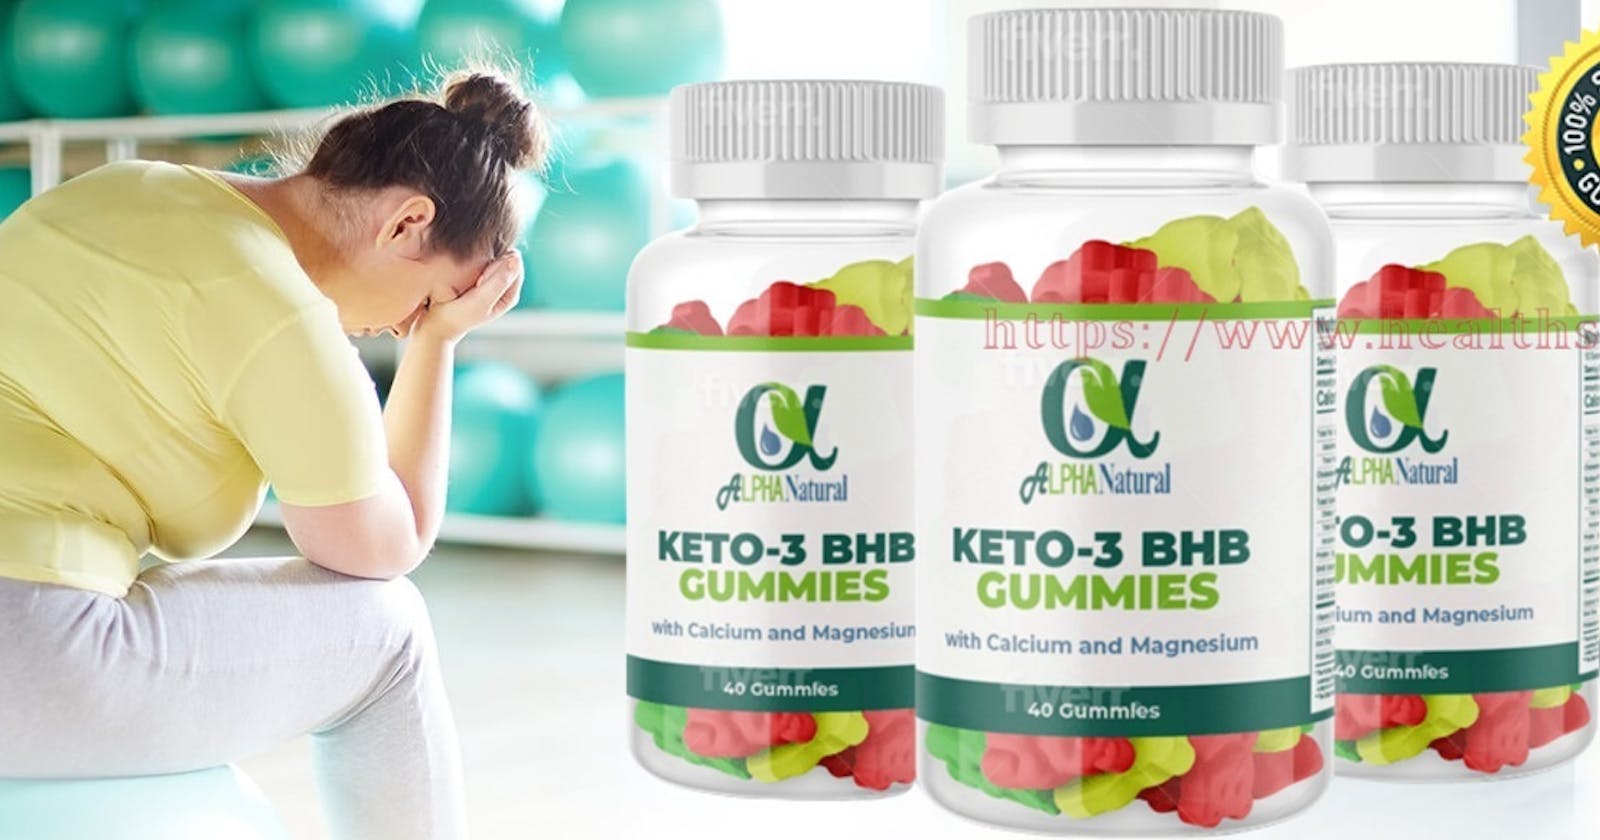 Alpha Natural Keto BHB Gummies Helpful For Loss Body Weight By Burning Fat Reserves Instead Of Carbs(Work Or Hoax)